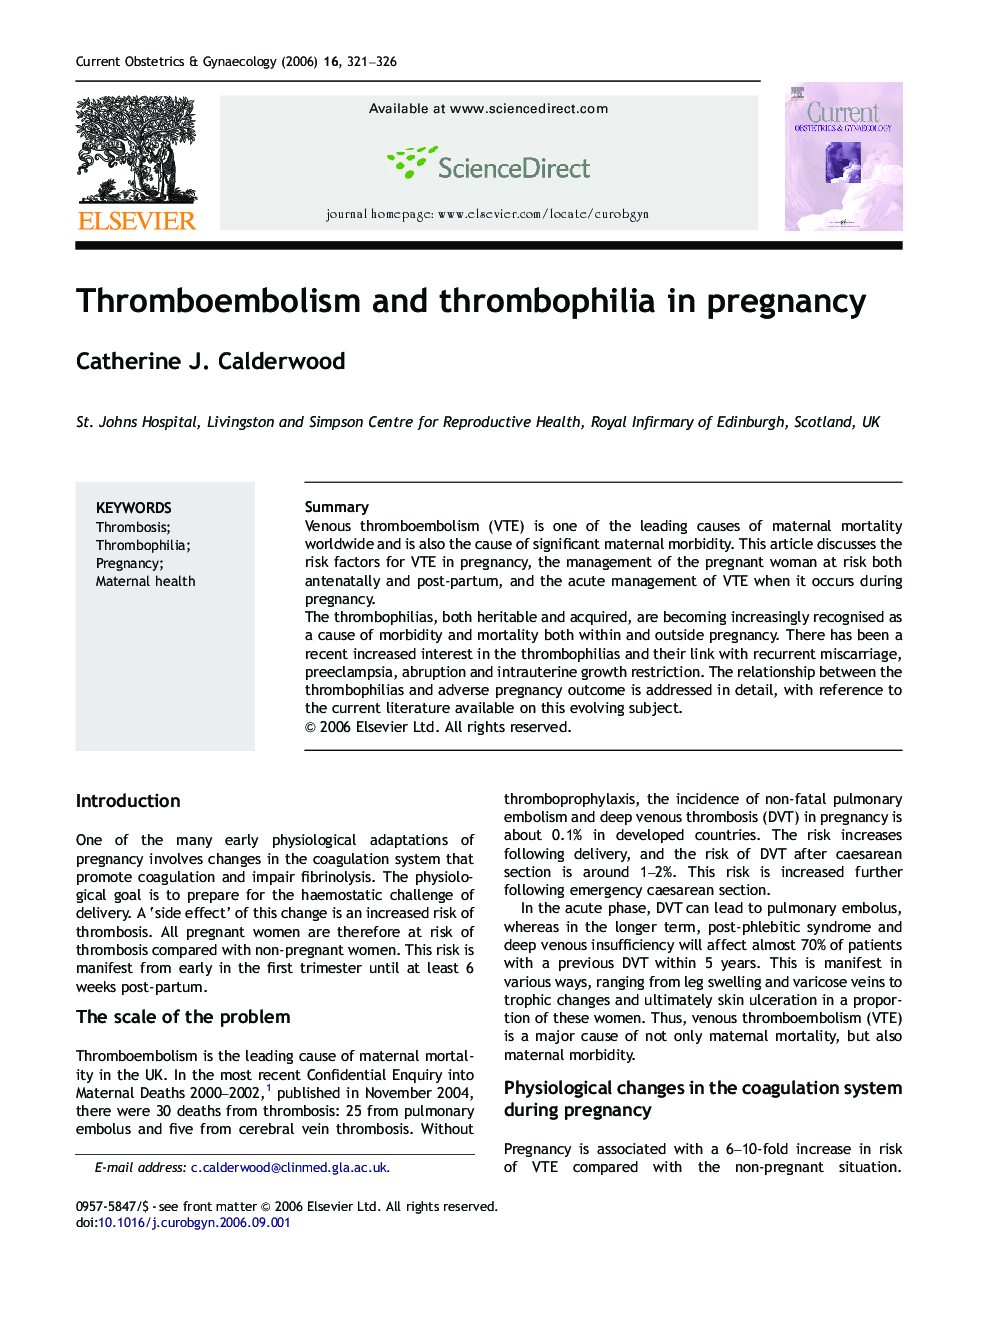 Thromboembolism and thrombophilia in pregnancy